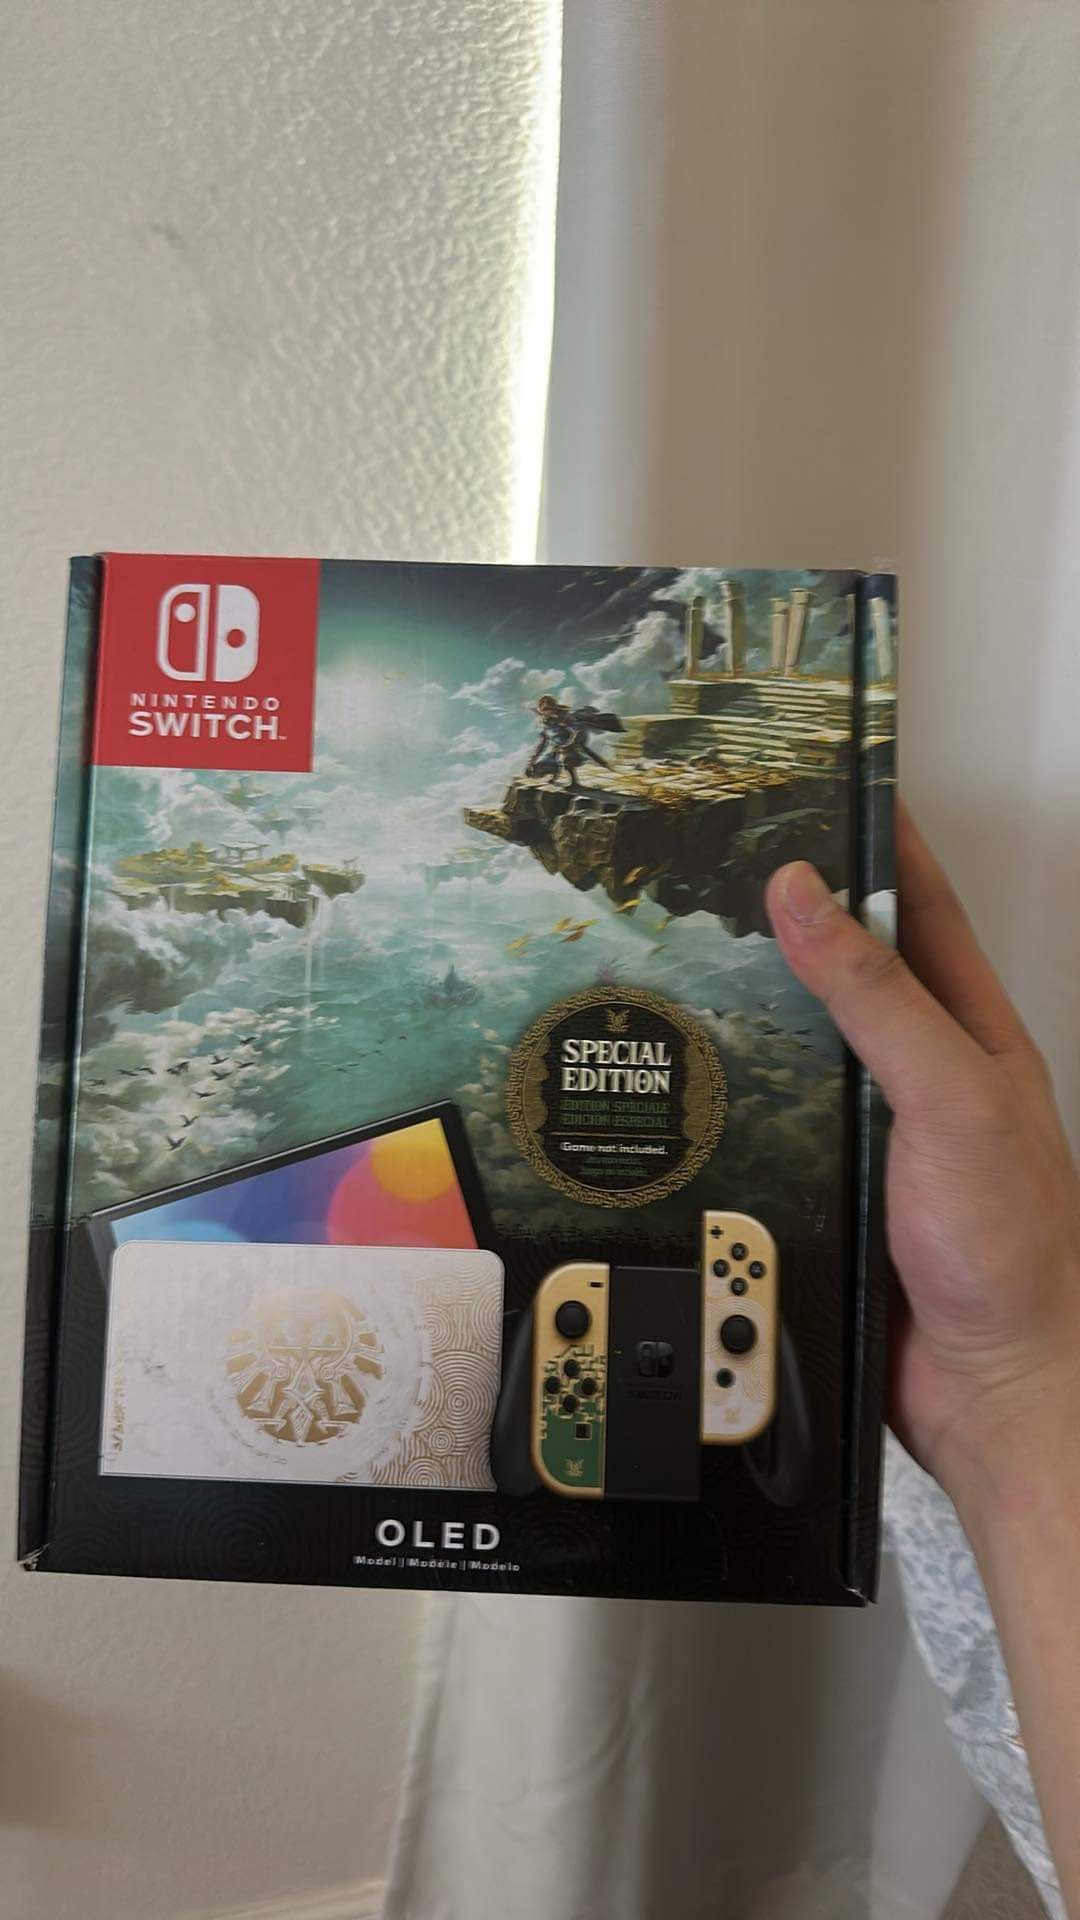 Nintendo Switch Limited Edition (OLED)